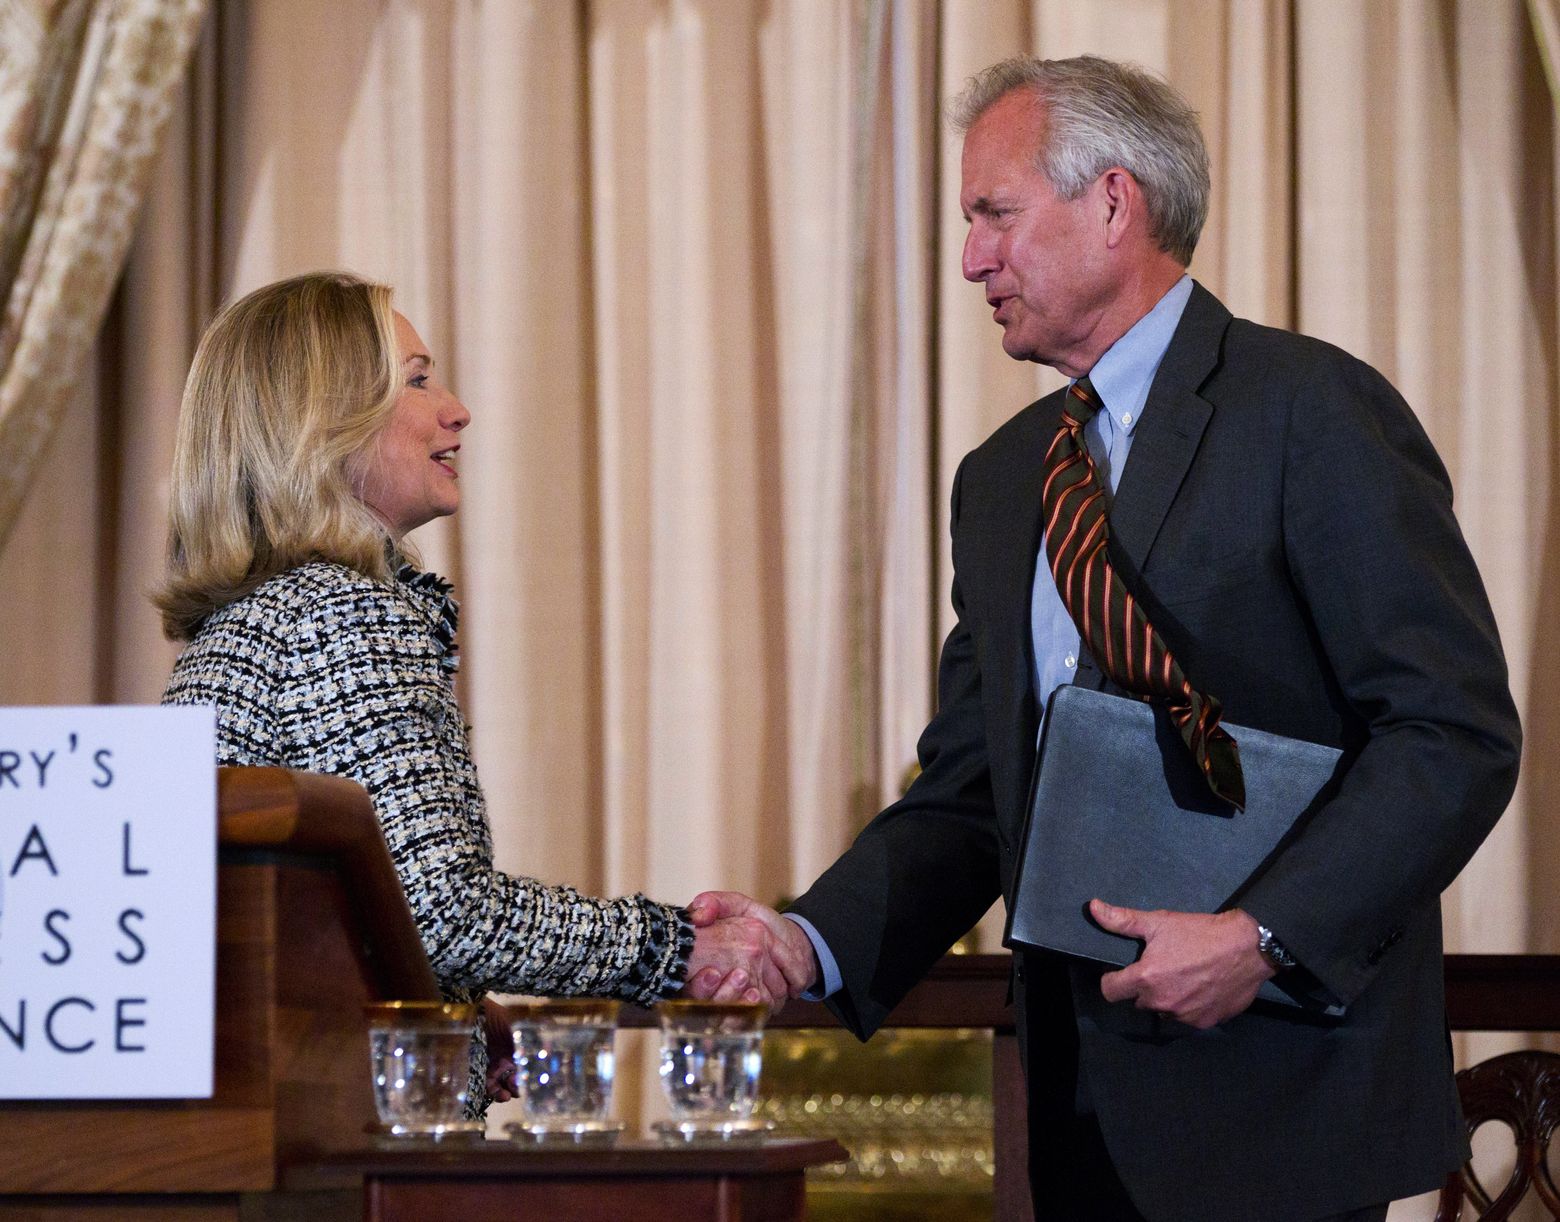 In 2012, Secretary of State Hillary Clinton greeted Boeing CEO Jim McNerney during the first-ever State Department Global Business Conference. (Manuel Balce Ceneta/AP)